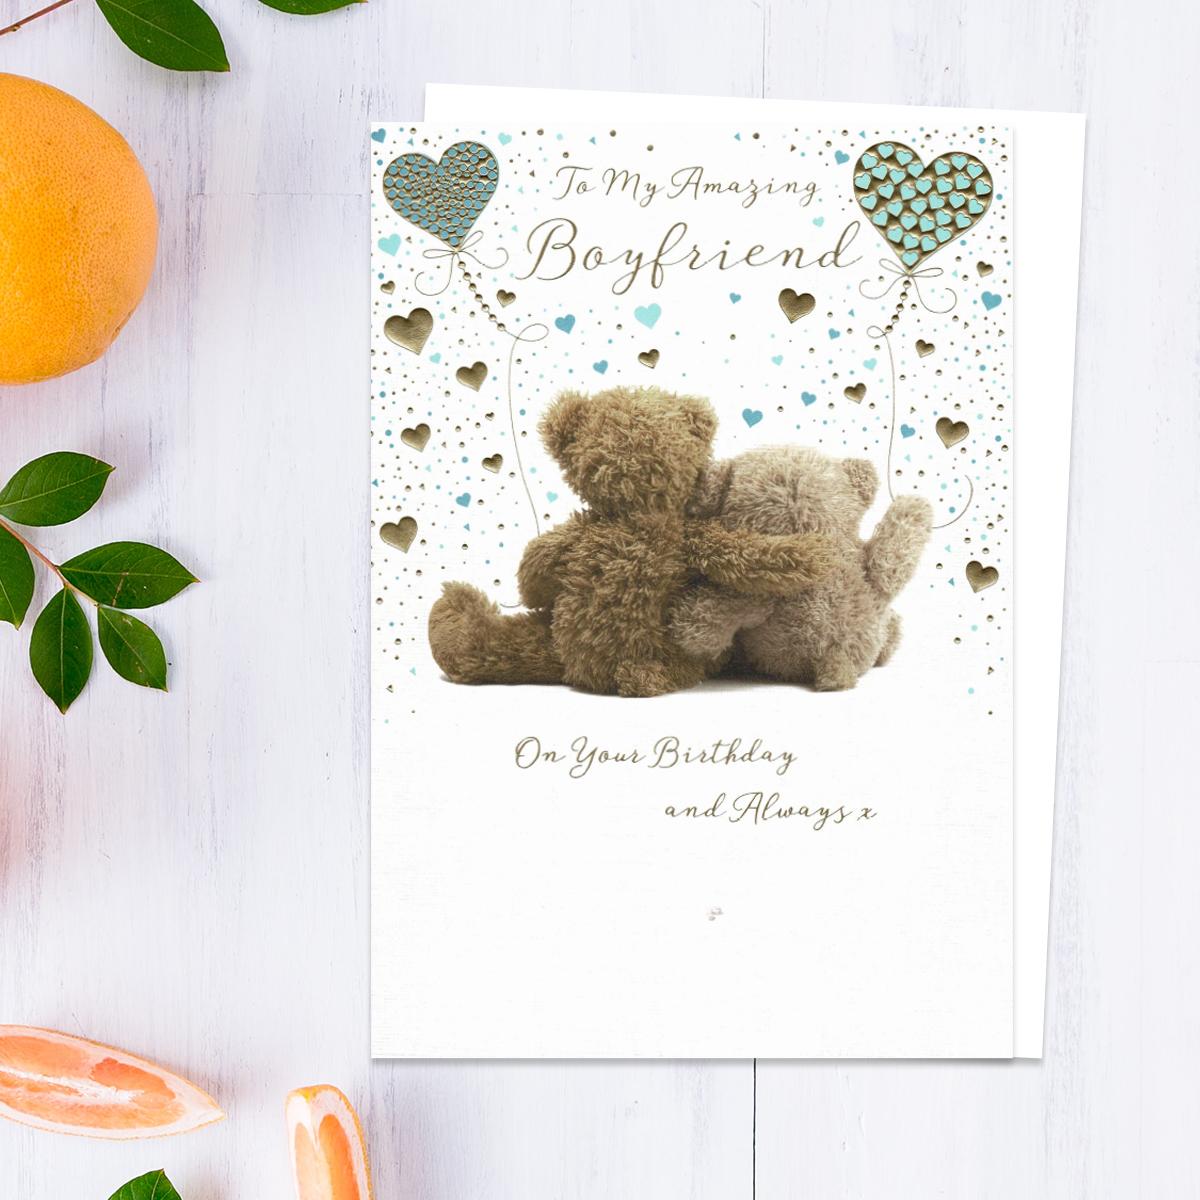 To My Amazing Boyfriend On Your Birthday And Always Showing Two Teddies Holding Balloons. Added Gold Foil Detail And White Envelope